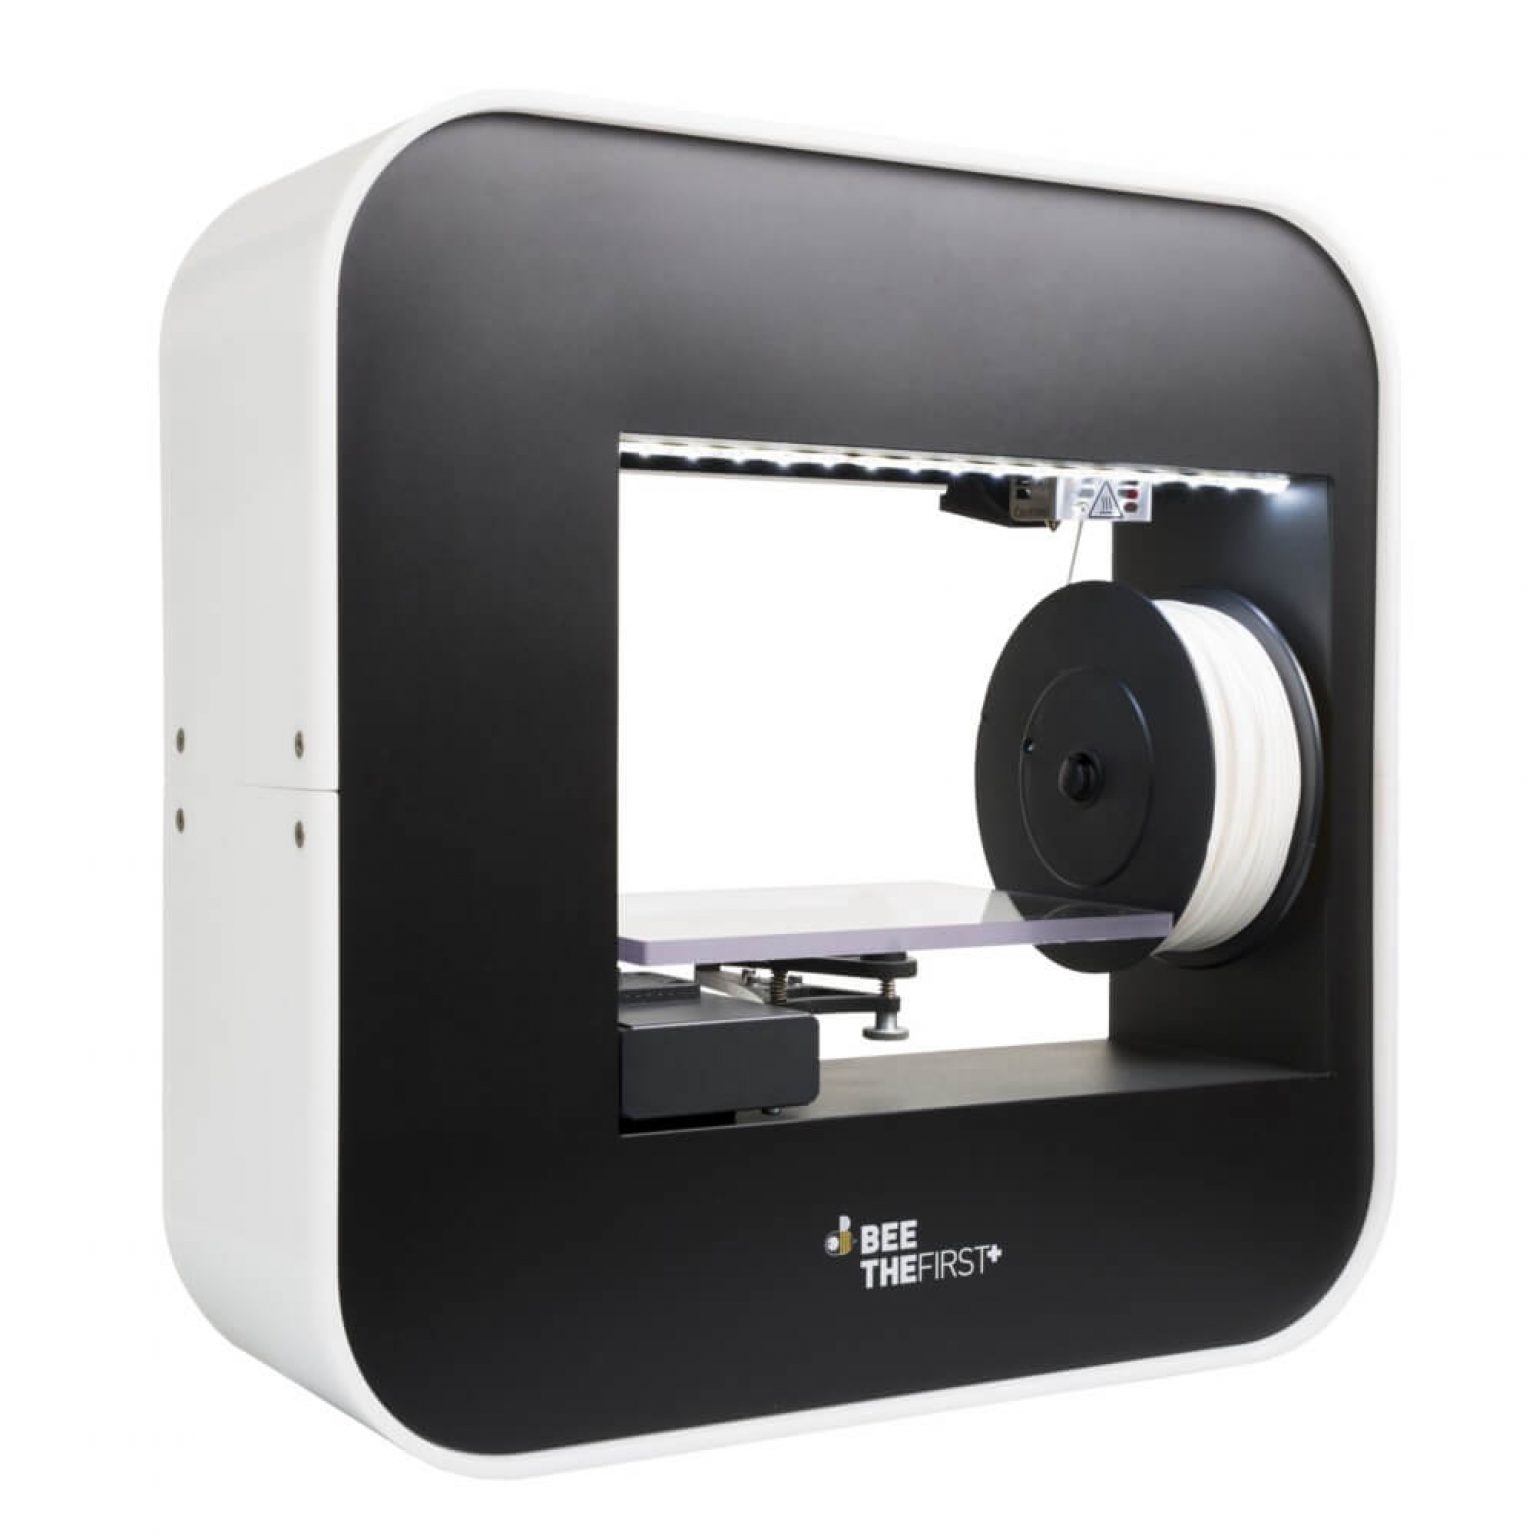 15 Best Commercial 3D Printers in 2021 - Beeverycreative Beethefirst 3D Printer 1536x1536